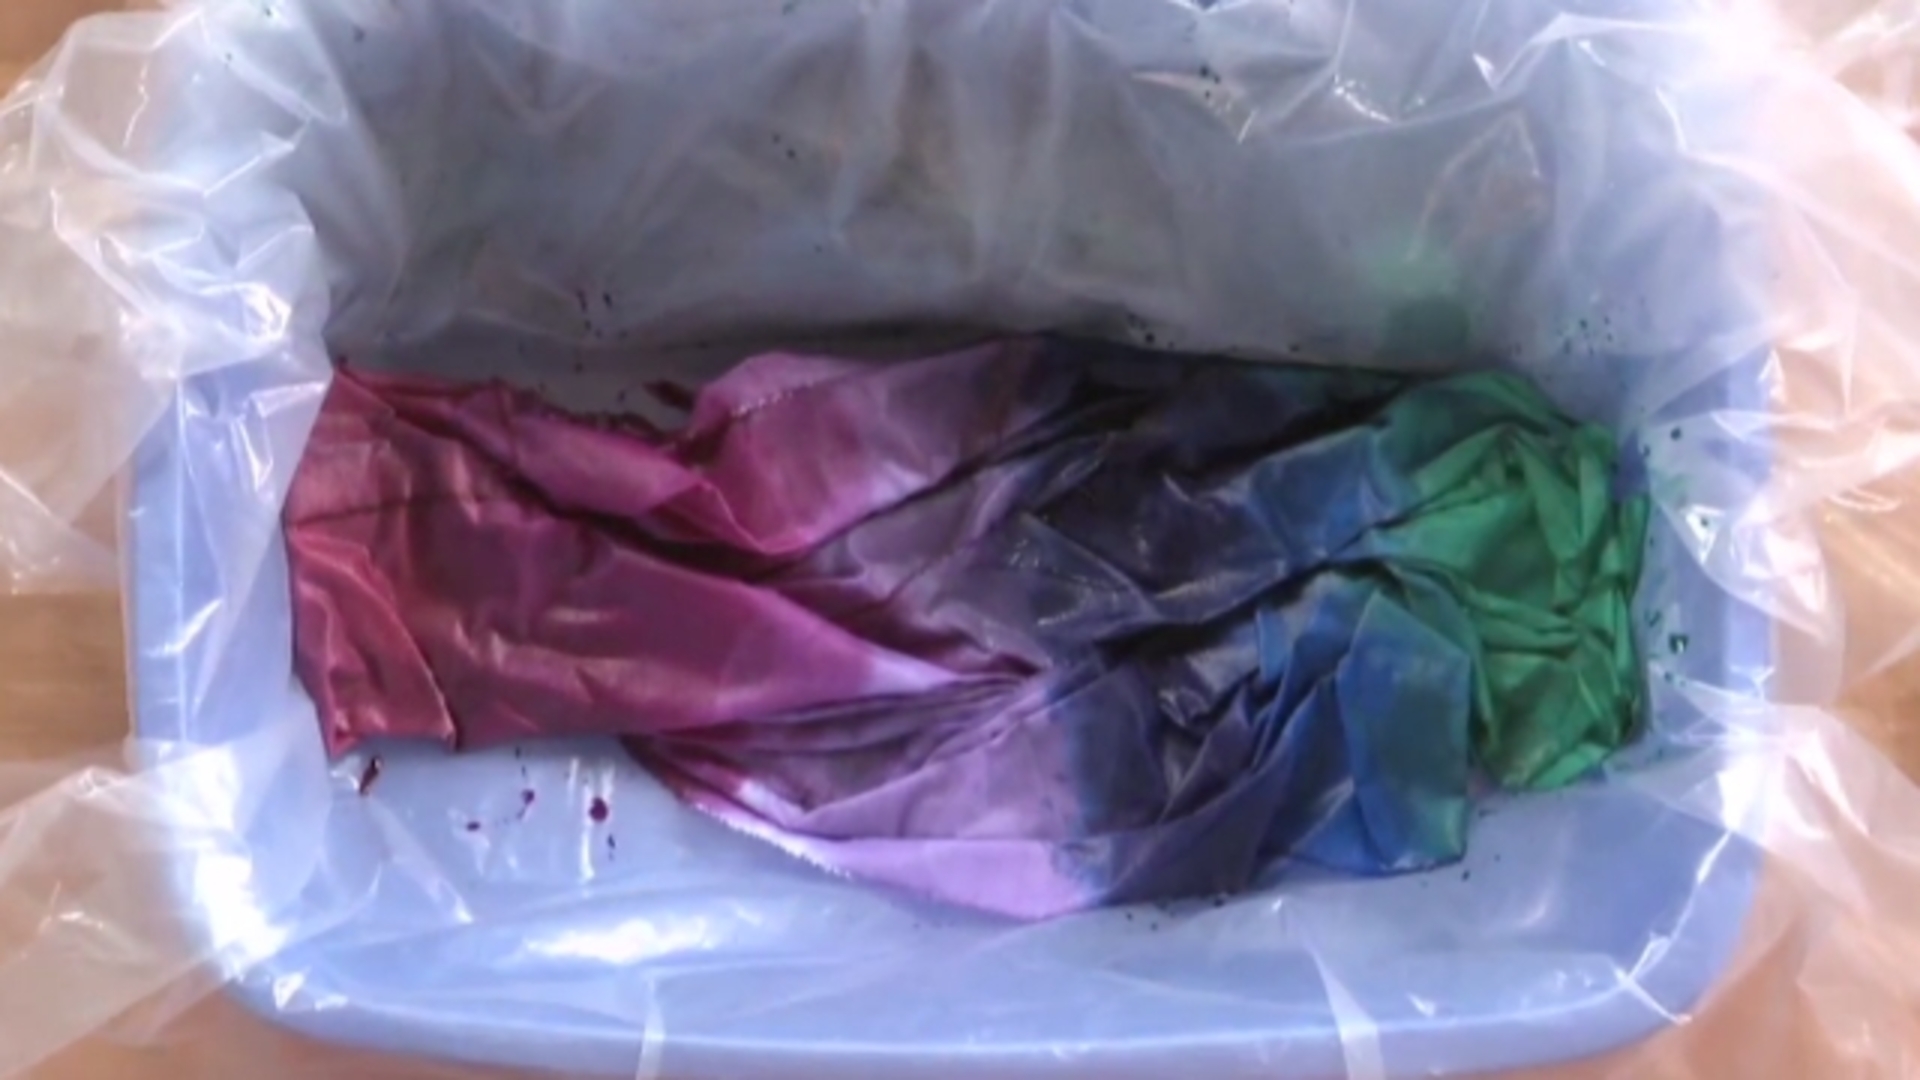 How to Rinse Dyed Fabrics using Synthrapol